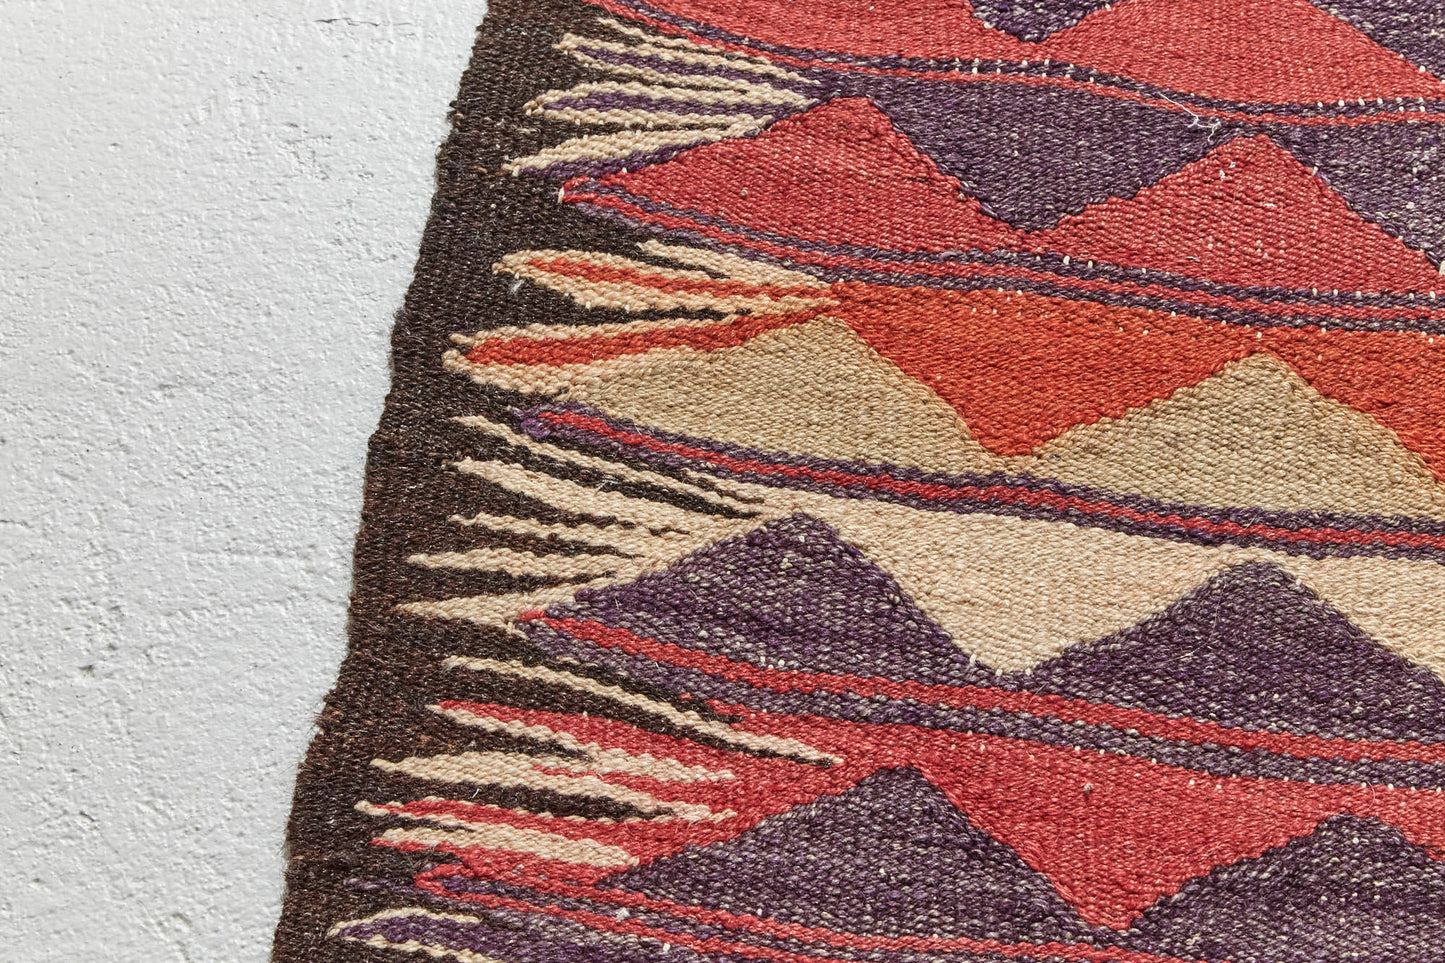 Hand woven flat weave Kilim with beige, red and grey triangle shapes - Perfect for bedroom, kitchen, dining or living room rug - Available from King Kennedy Rugs Los Angeles